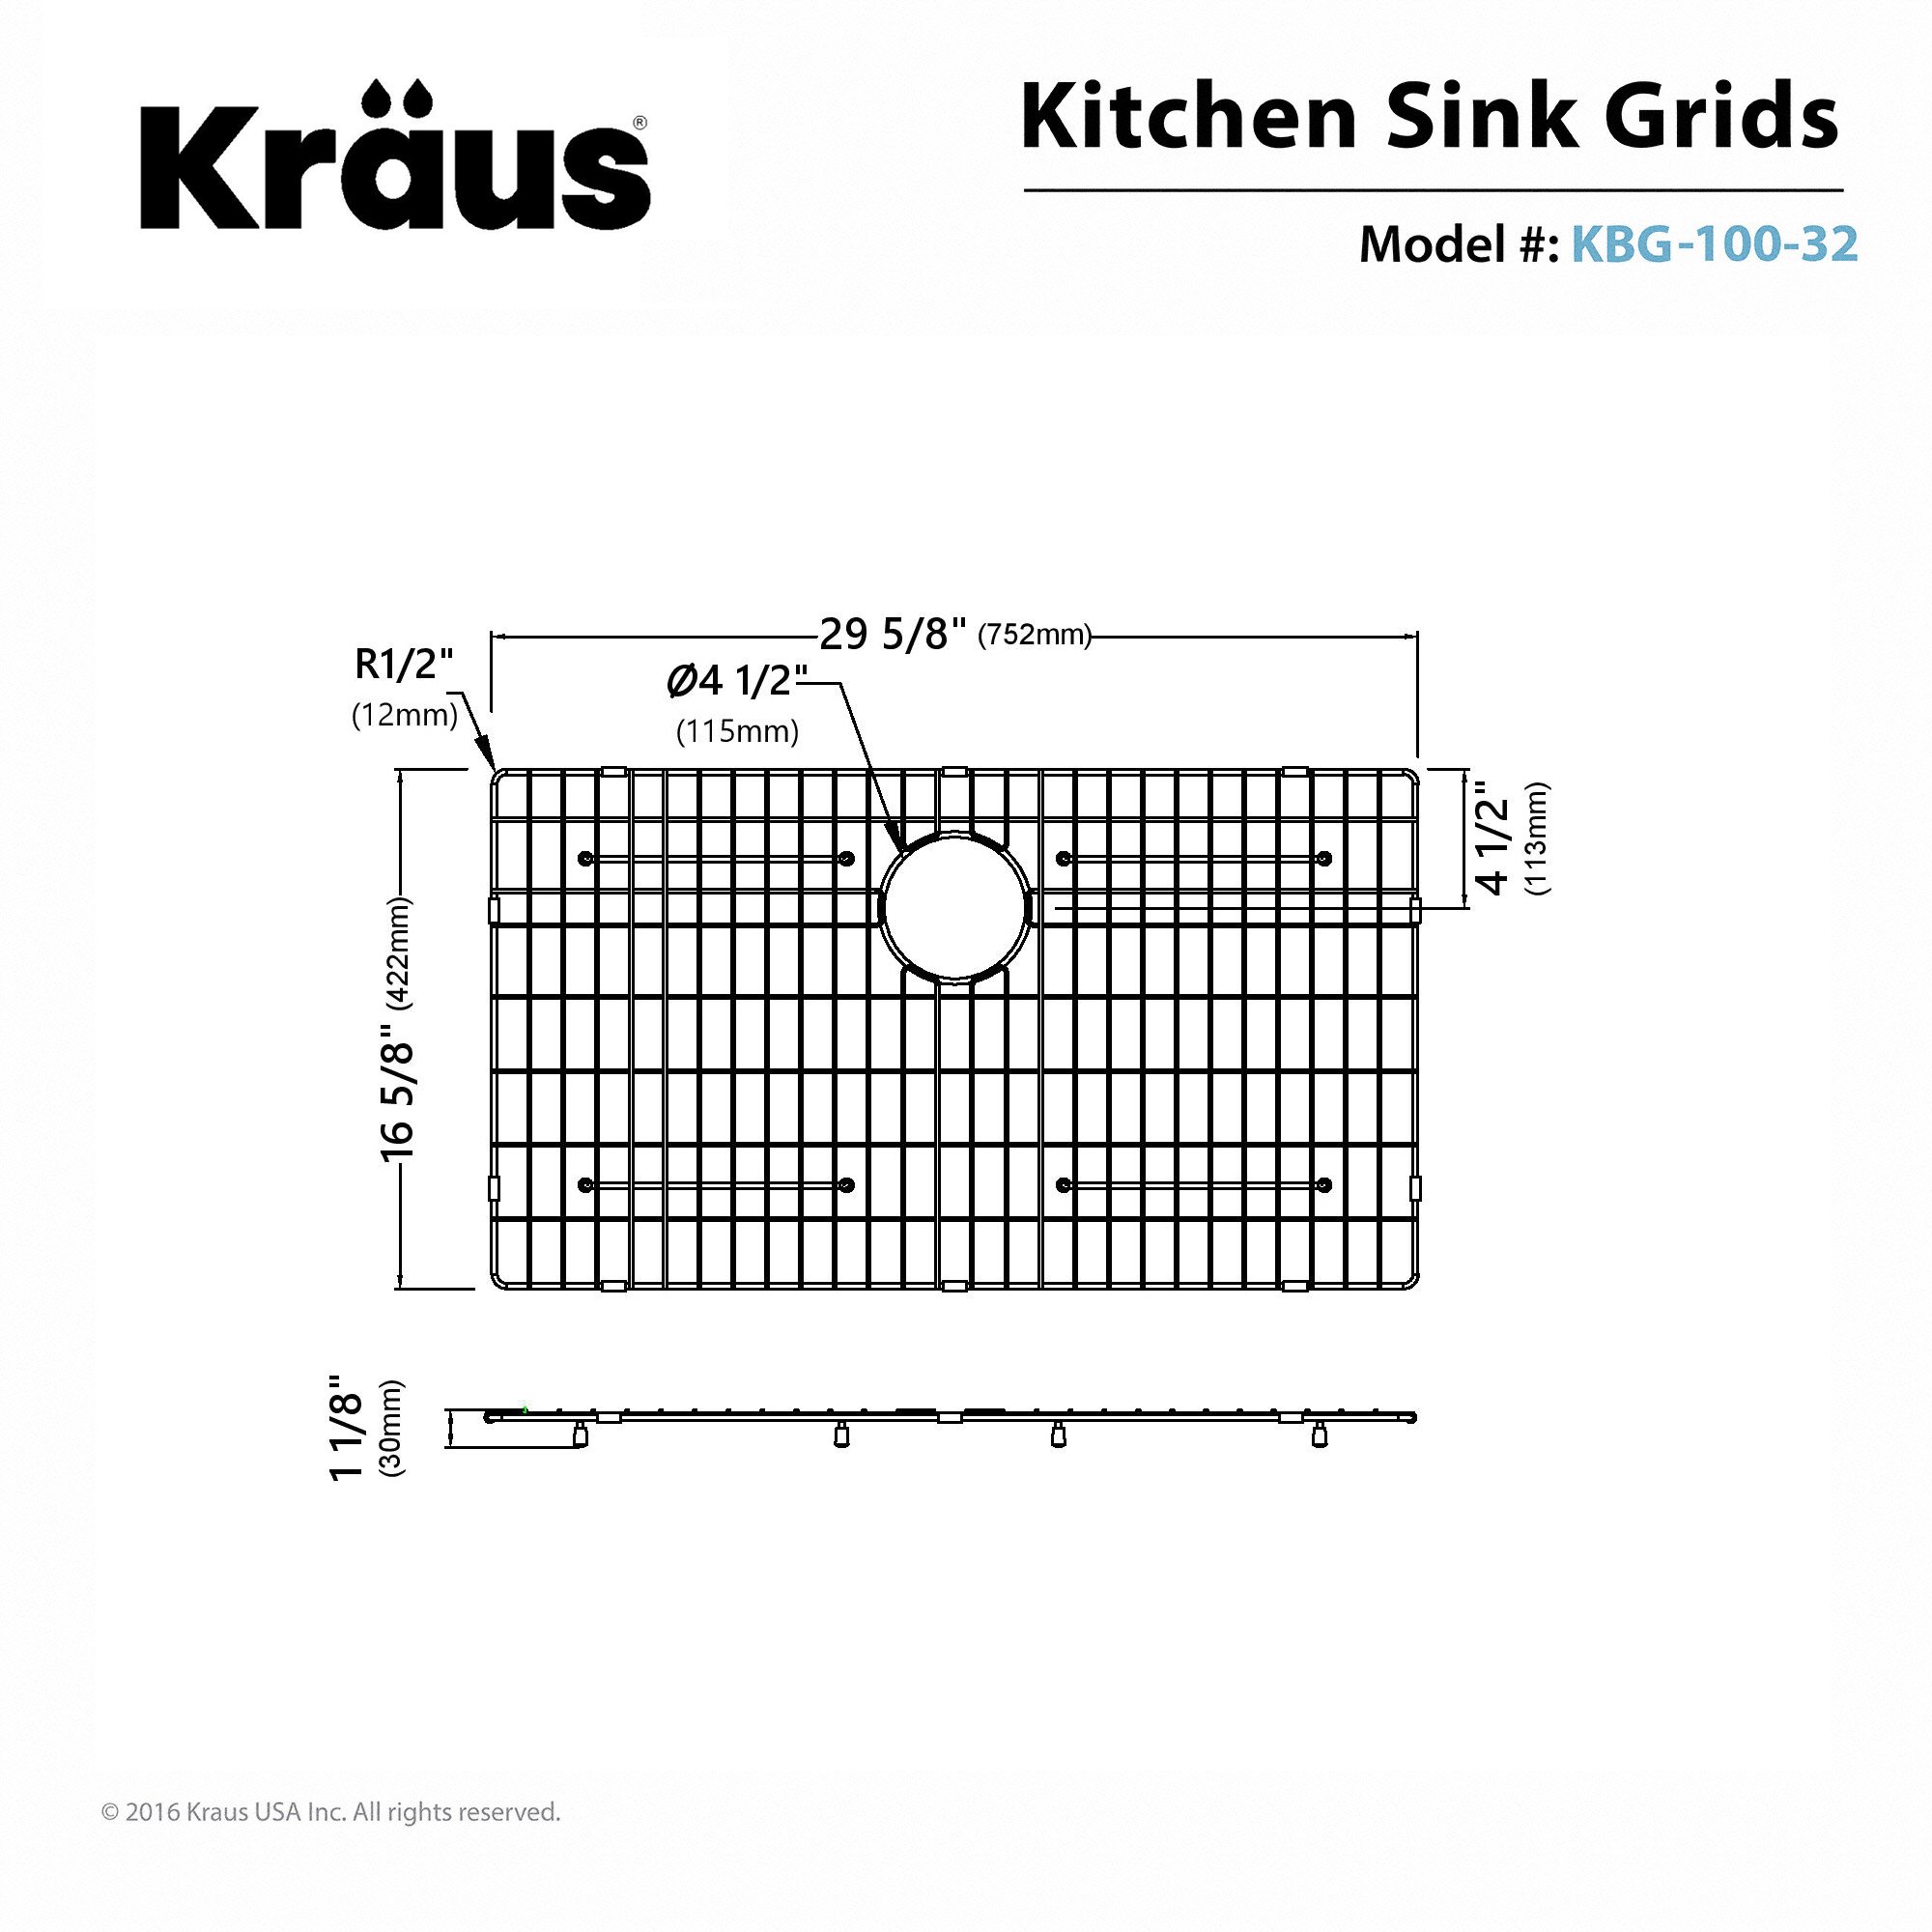 Kraus Kbg-100-32 Stainless Steel Bottom Grid With Protective Anti-scratch Bumpers For Khu100-32 Kitchen Sink